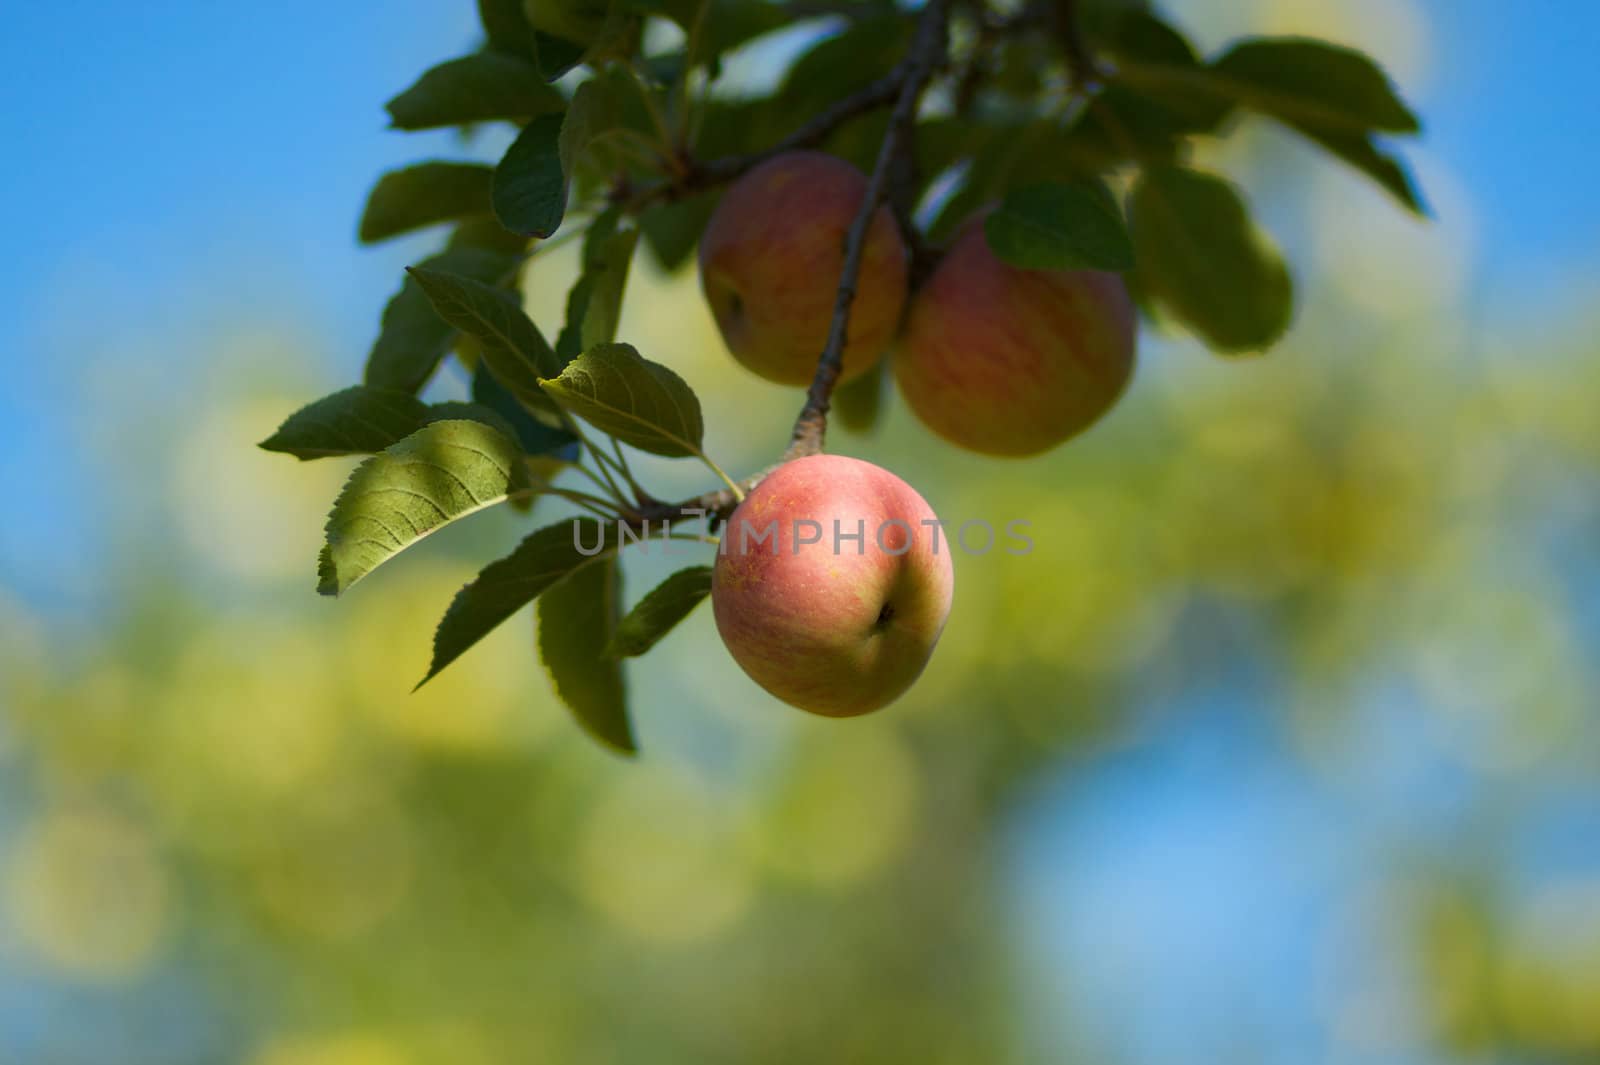 a red apple still on the branch against a soft focus background of blue sky and other apple trees